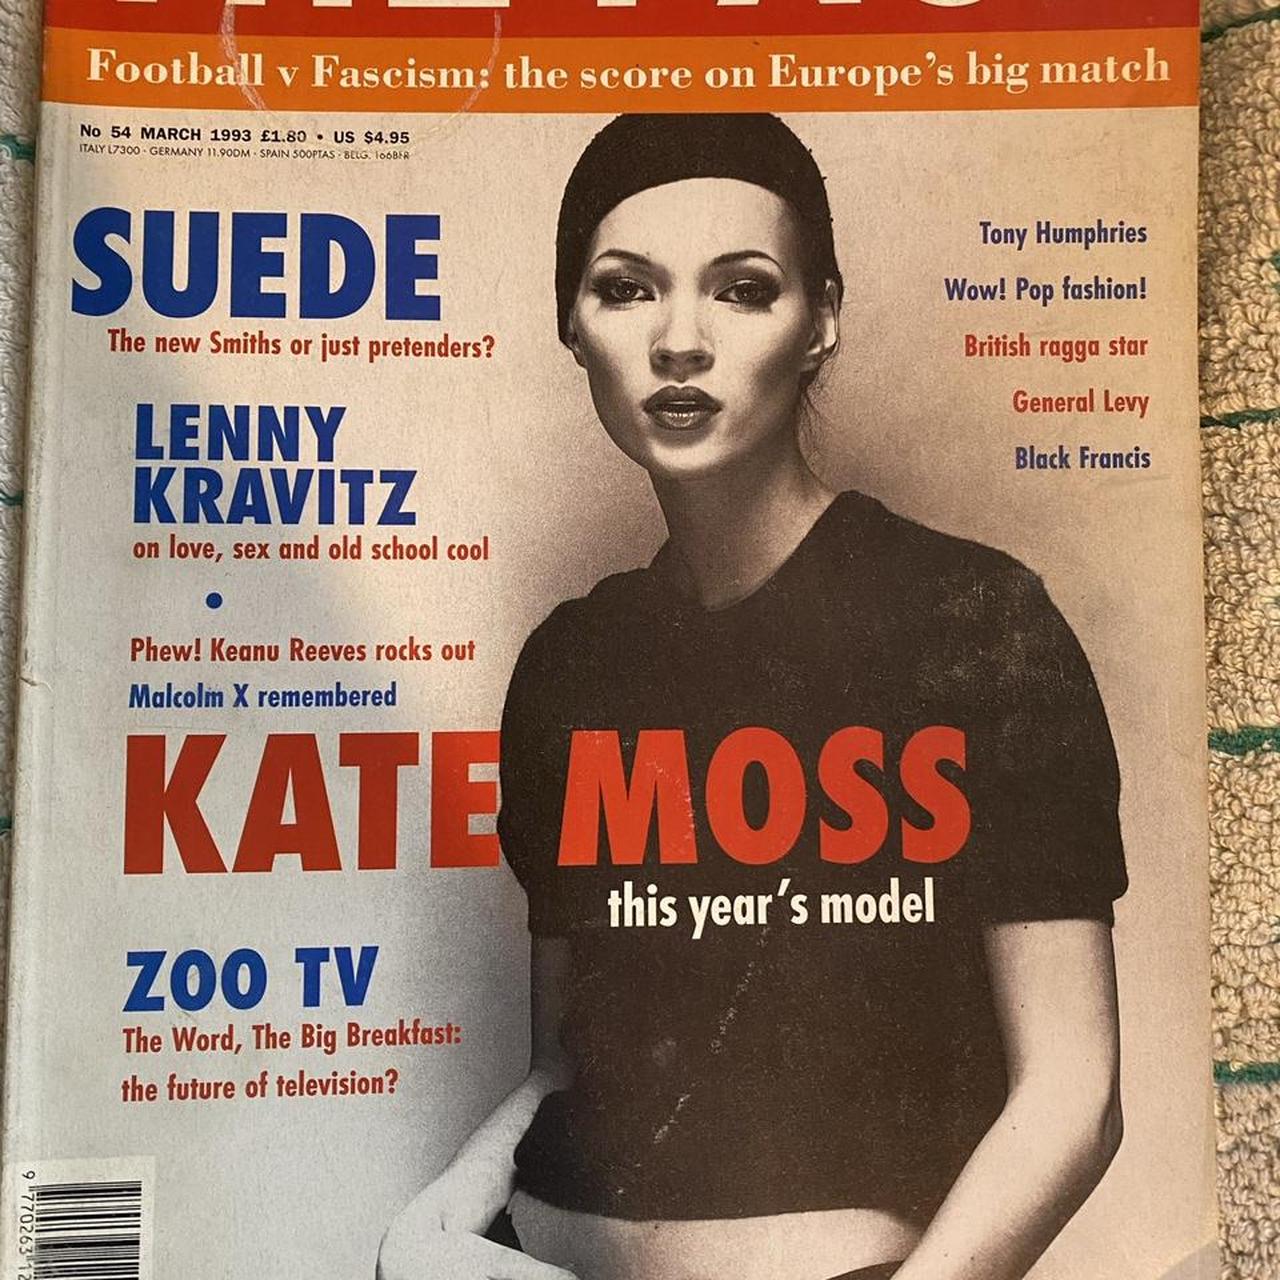 Kate Moss The Face March 1999 #katemoss #theface #90s - Depop